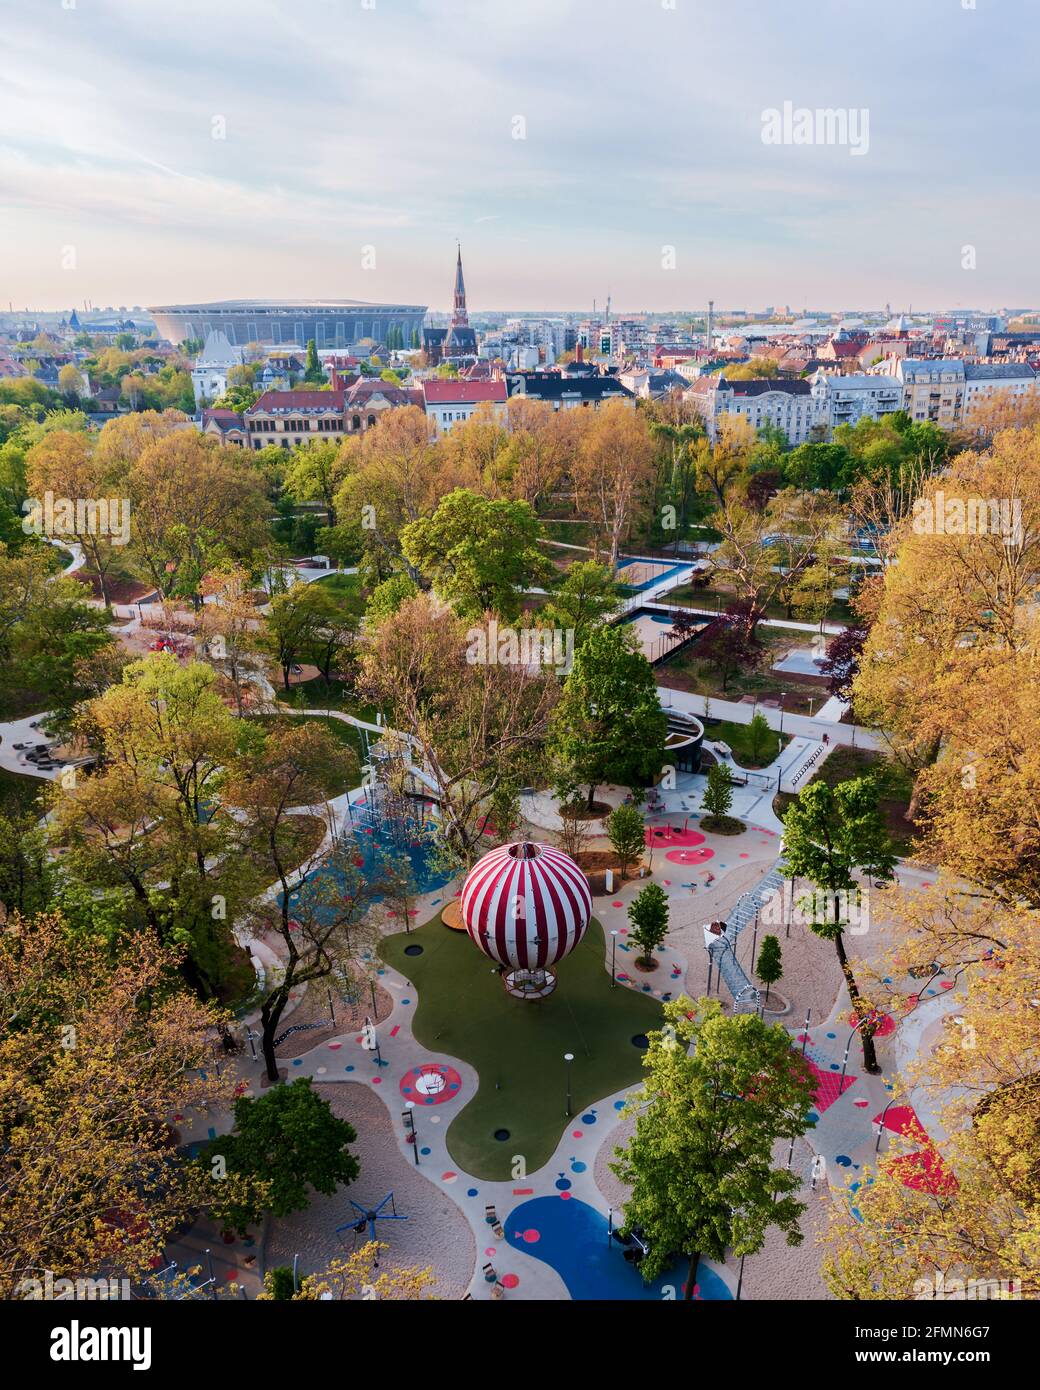 Budapest City park big playground in aerialpanormaic photo. Renwed nice play place for children all ages. Amazing bright morning lights. Stock Photo